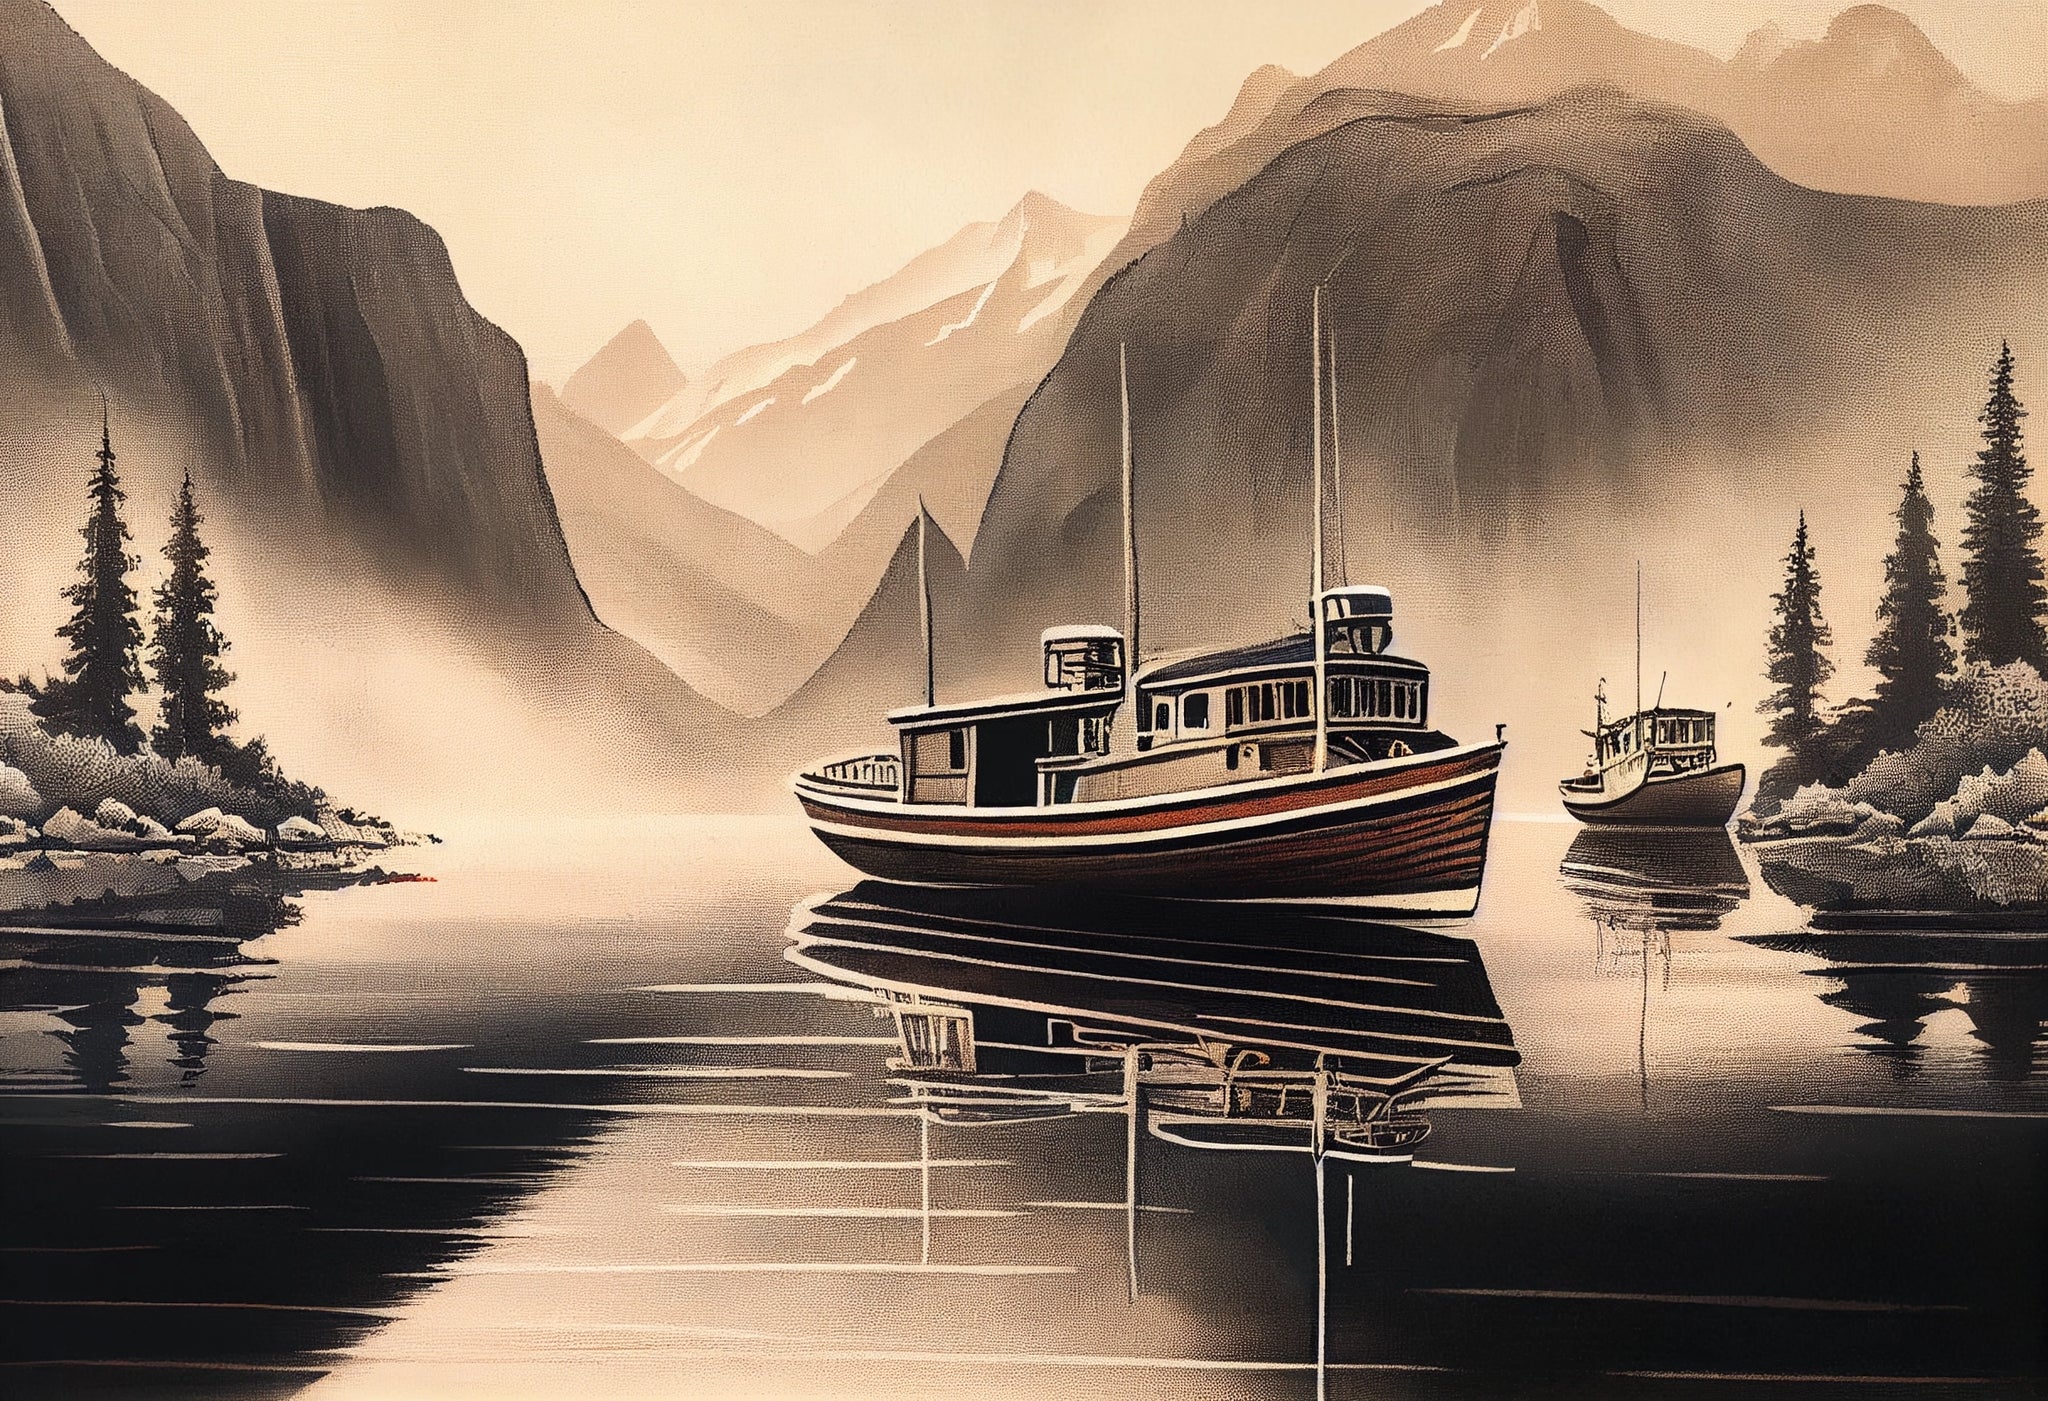 Misty Mountain Serenity: Airbrush Art Print of Boats on a Calm Lake